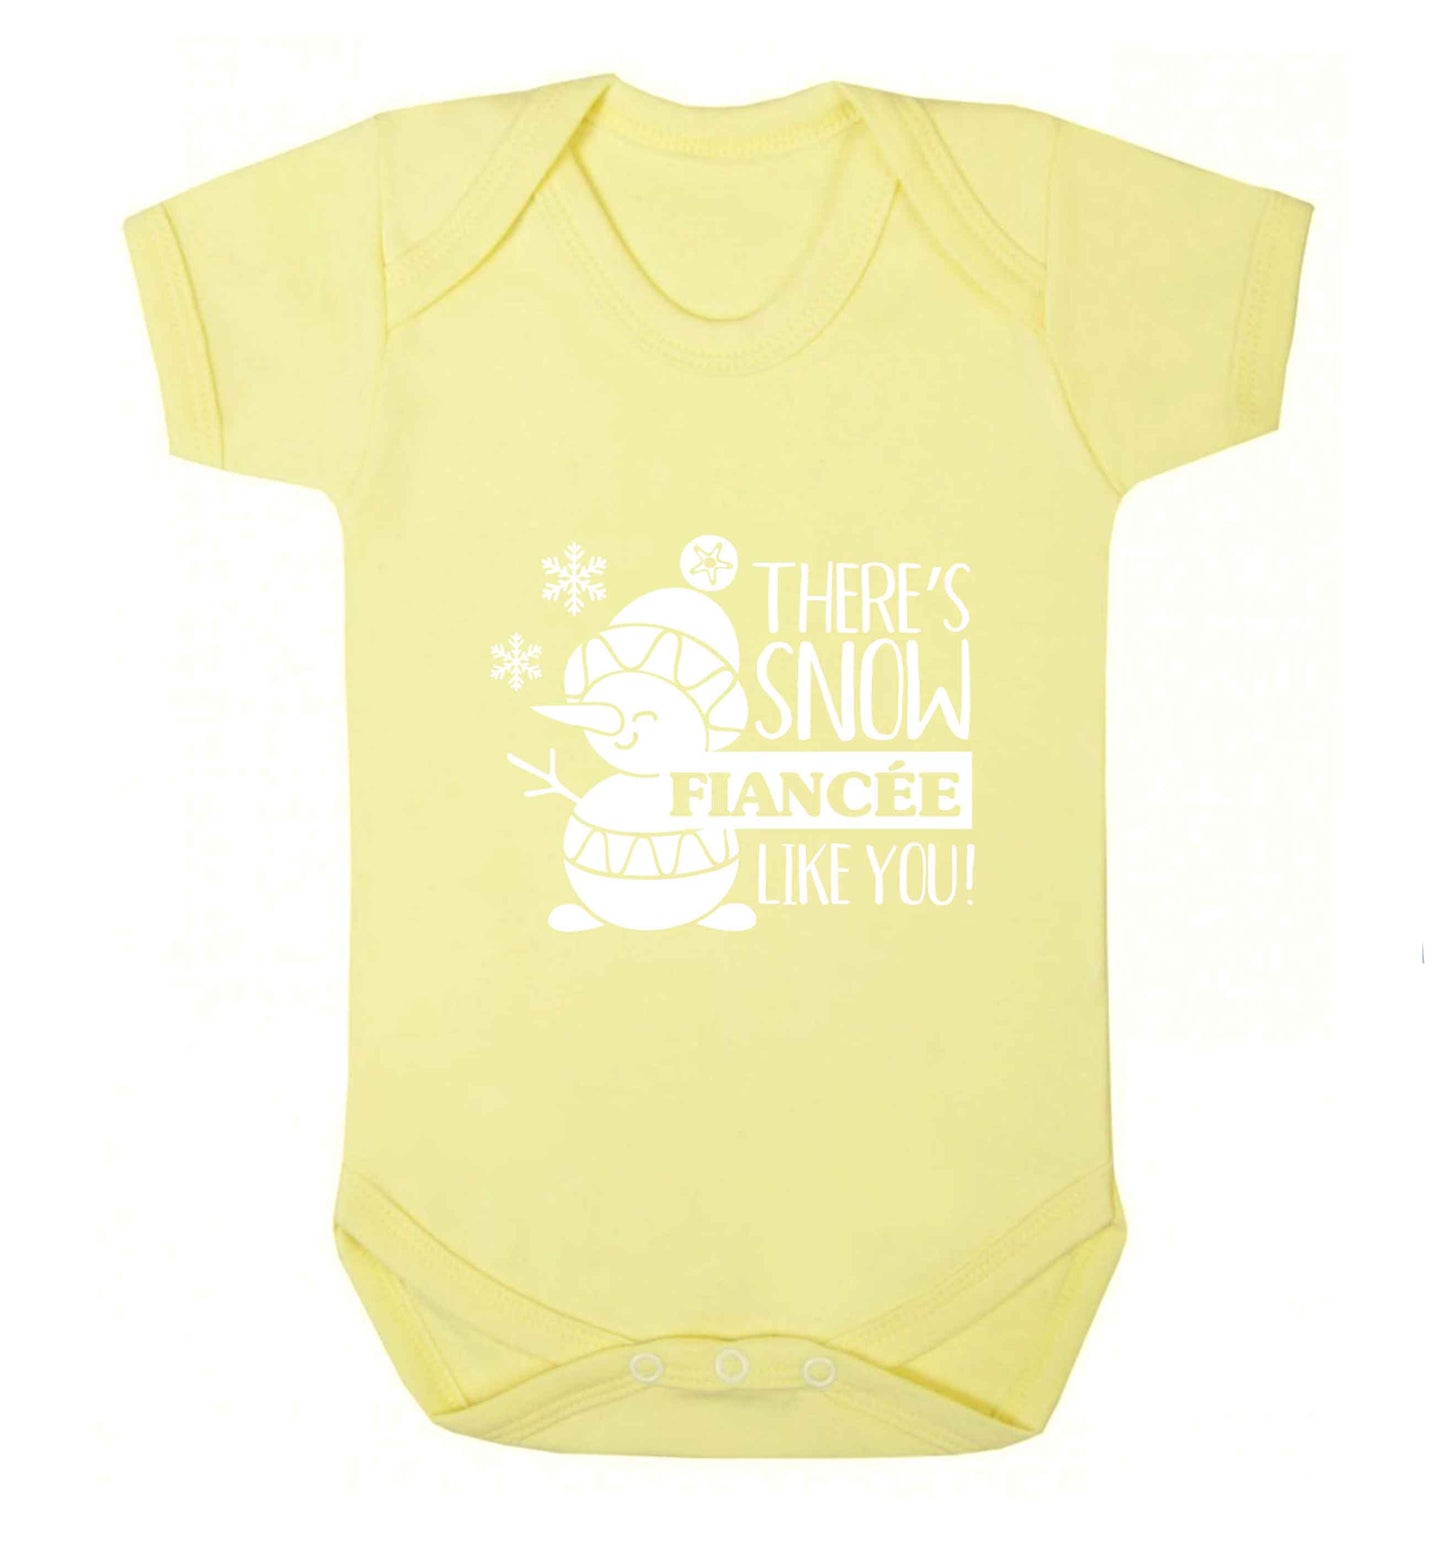 There's snow fiancee like you baby vest pale yellow 18-24 months